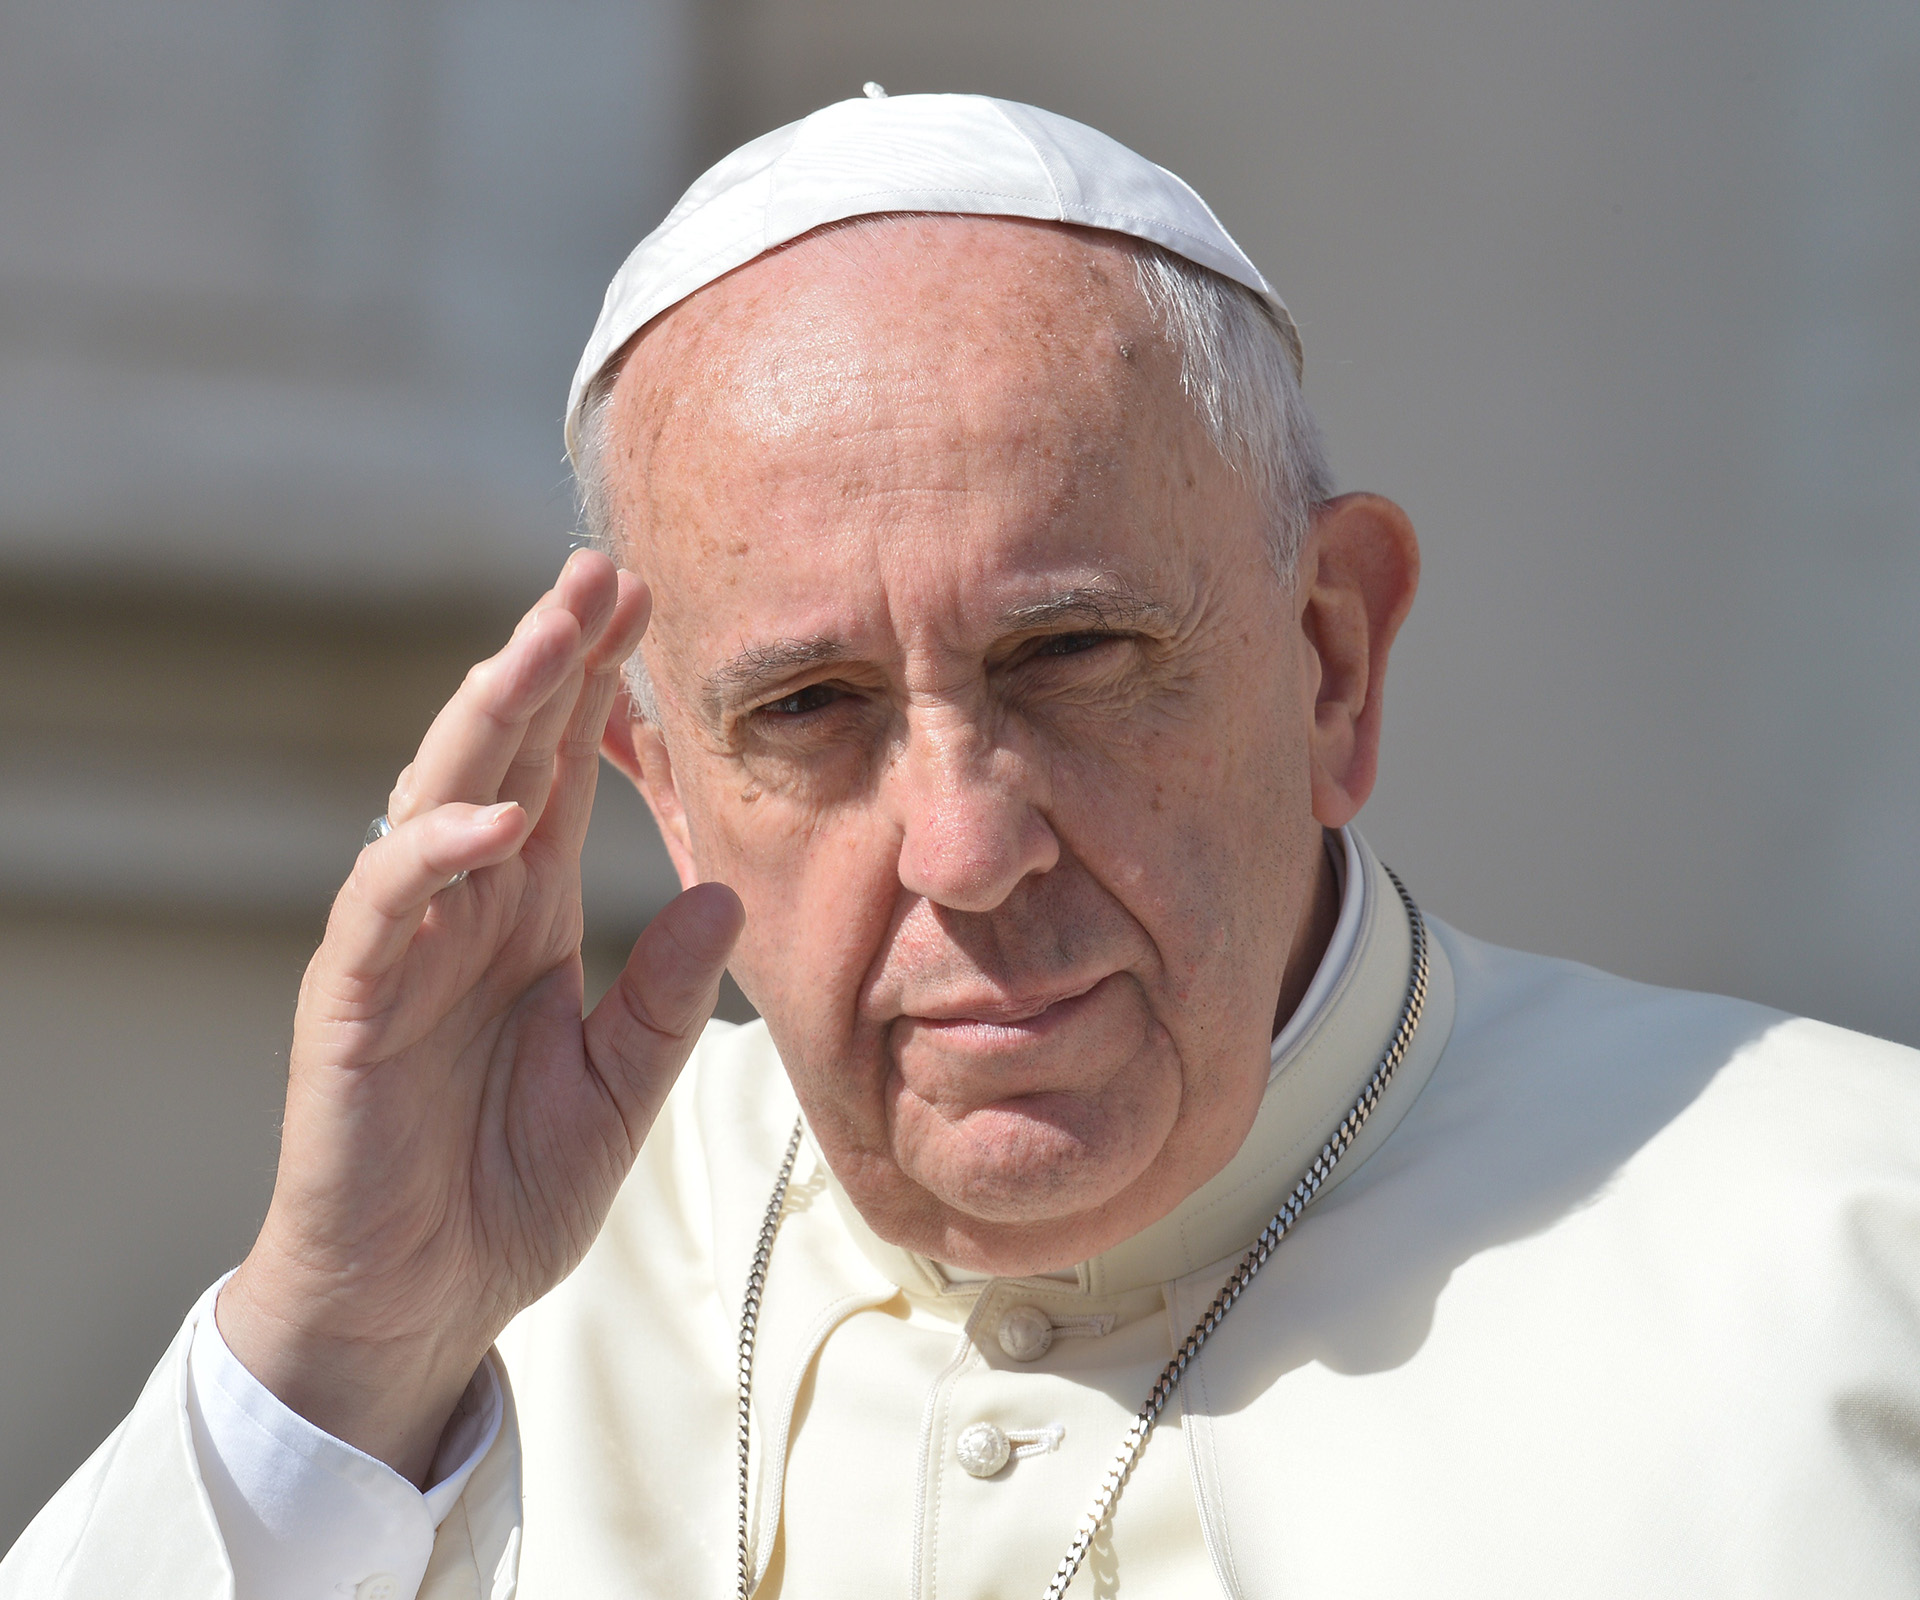 Pope Francis says divorce is sometimes “morally necessary”